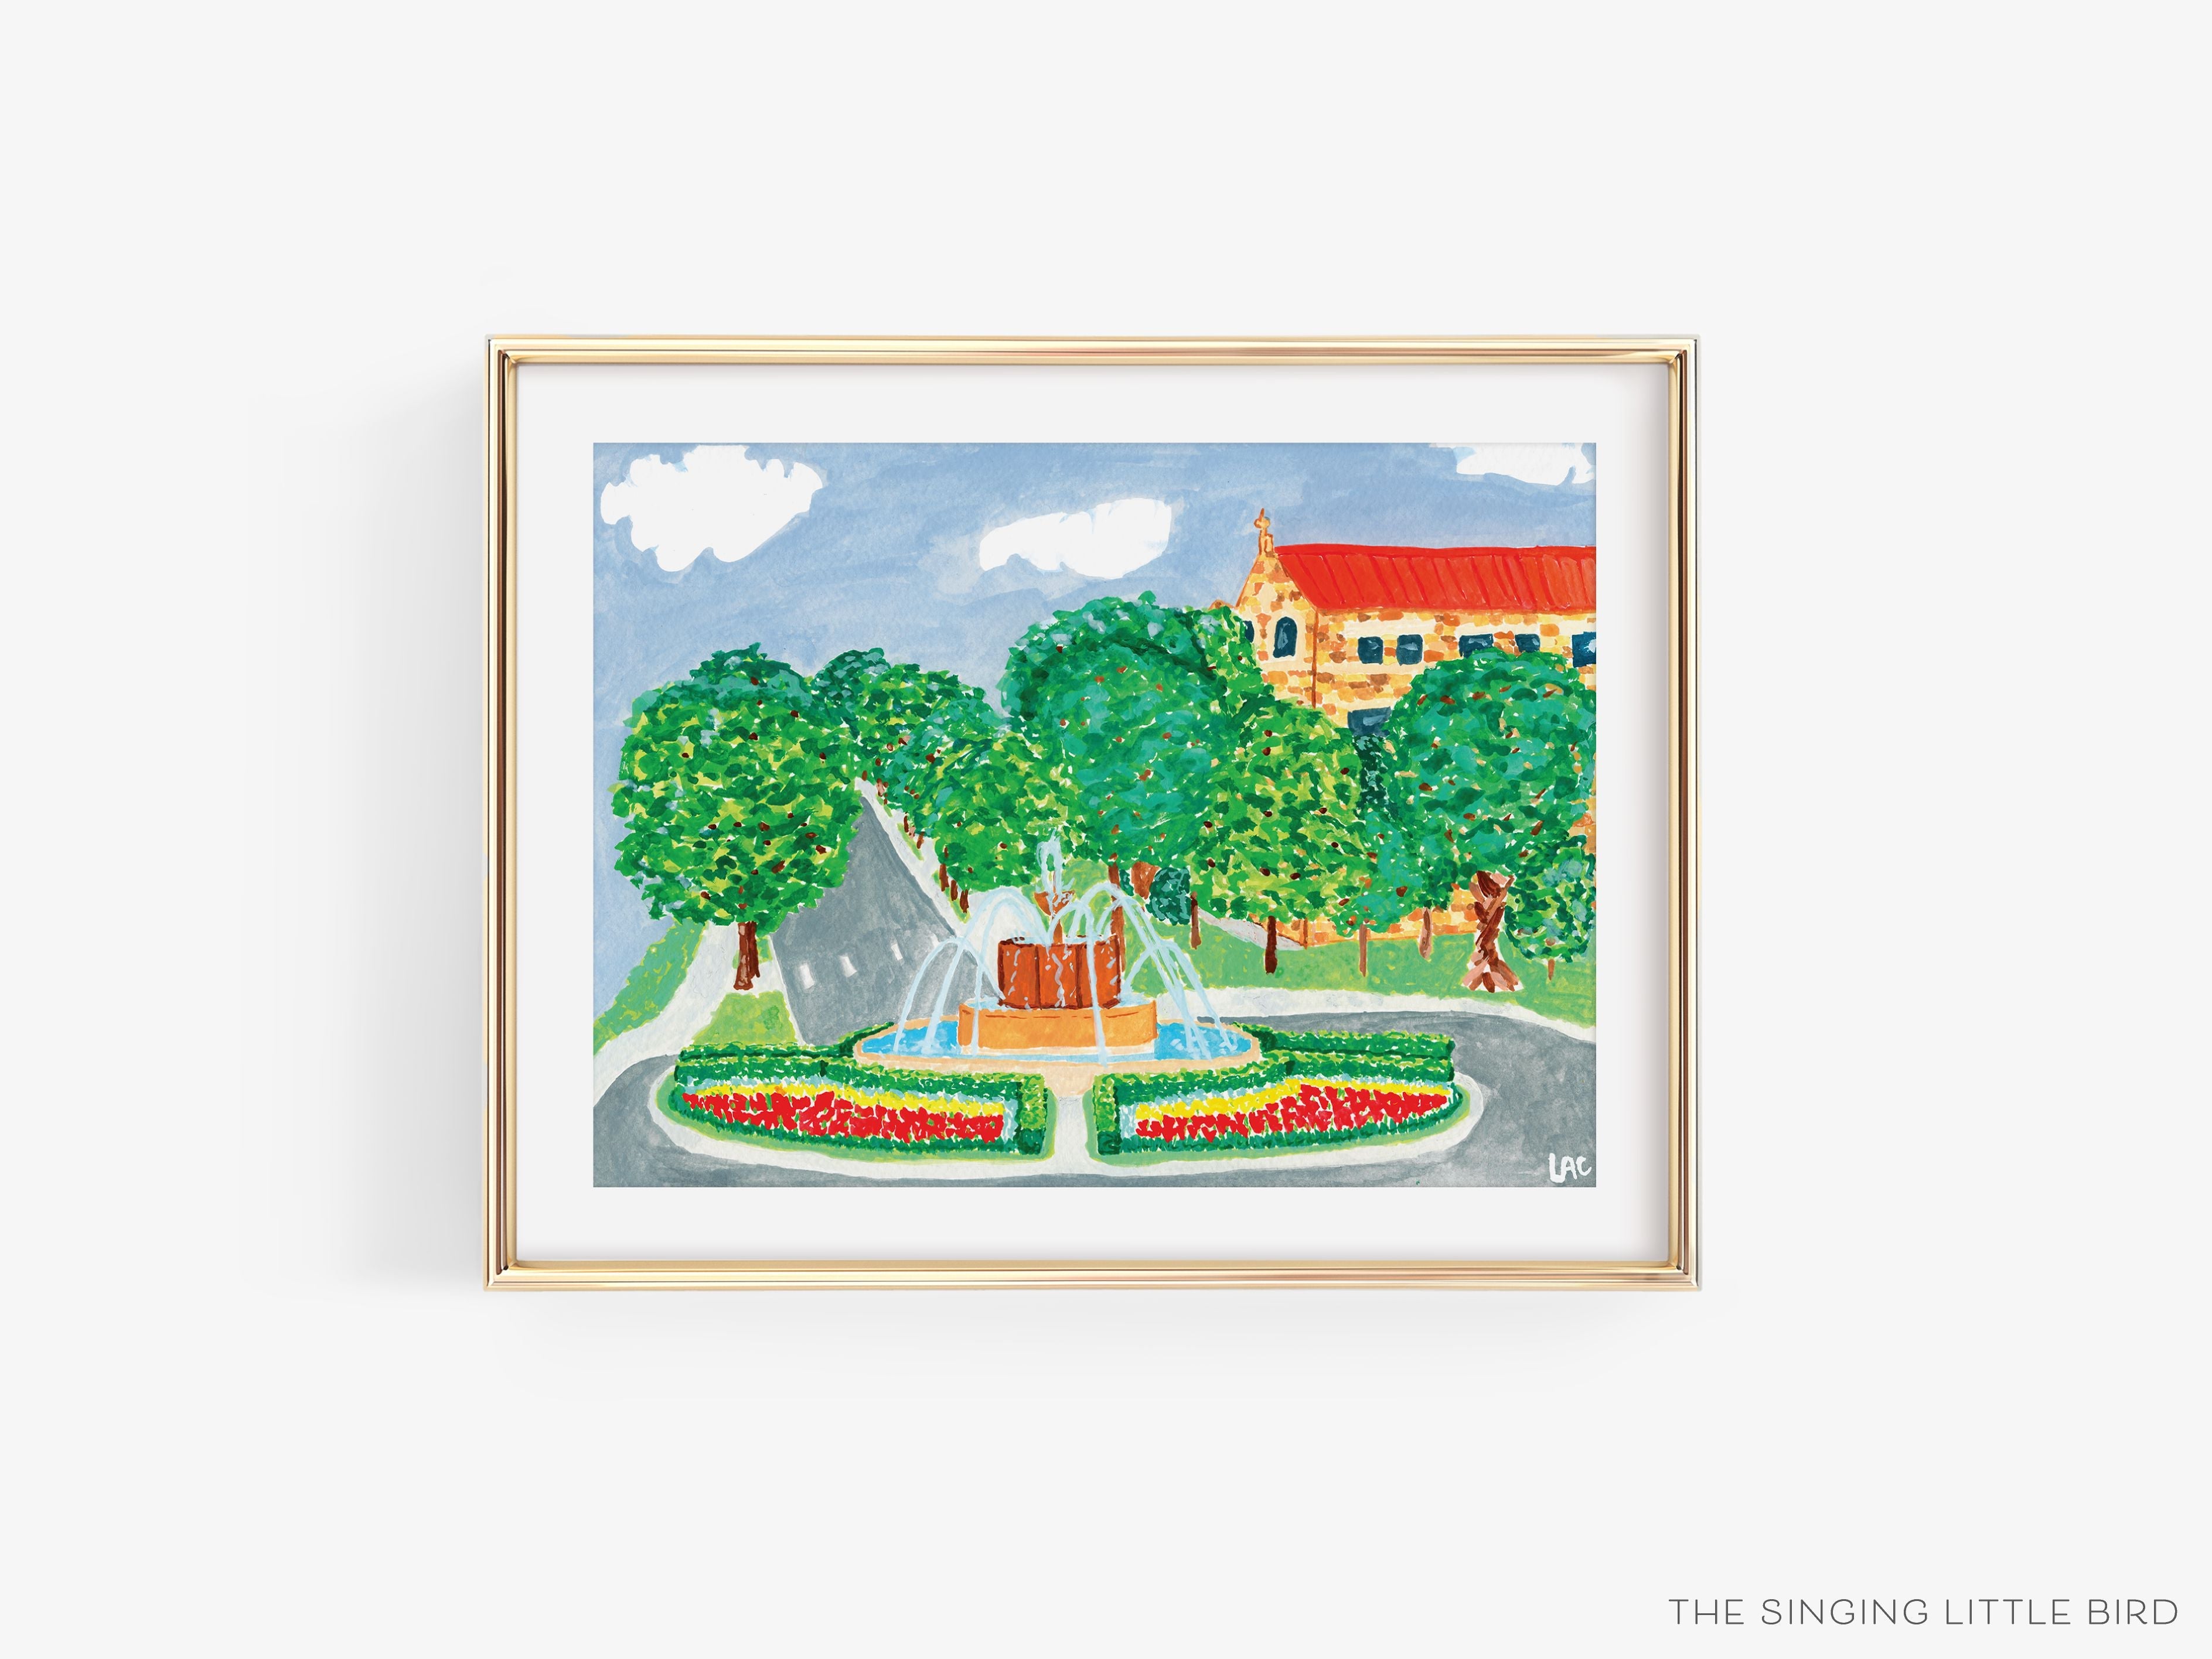 Spring Chi-Omega Fountain KU Art Print [Officially Licensed Product]-This watercolor art print features our hand-painted Chi-Omega Fountain on The University of Kansas campus, printed in the USA on 120lb high quality art paper. This makes a great gift or wall decor for the KU student or alumnus in your life.-The Singing Little Bird